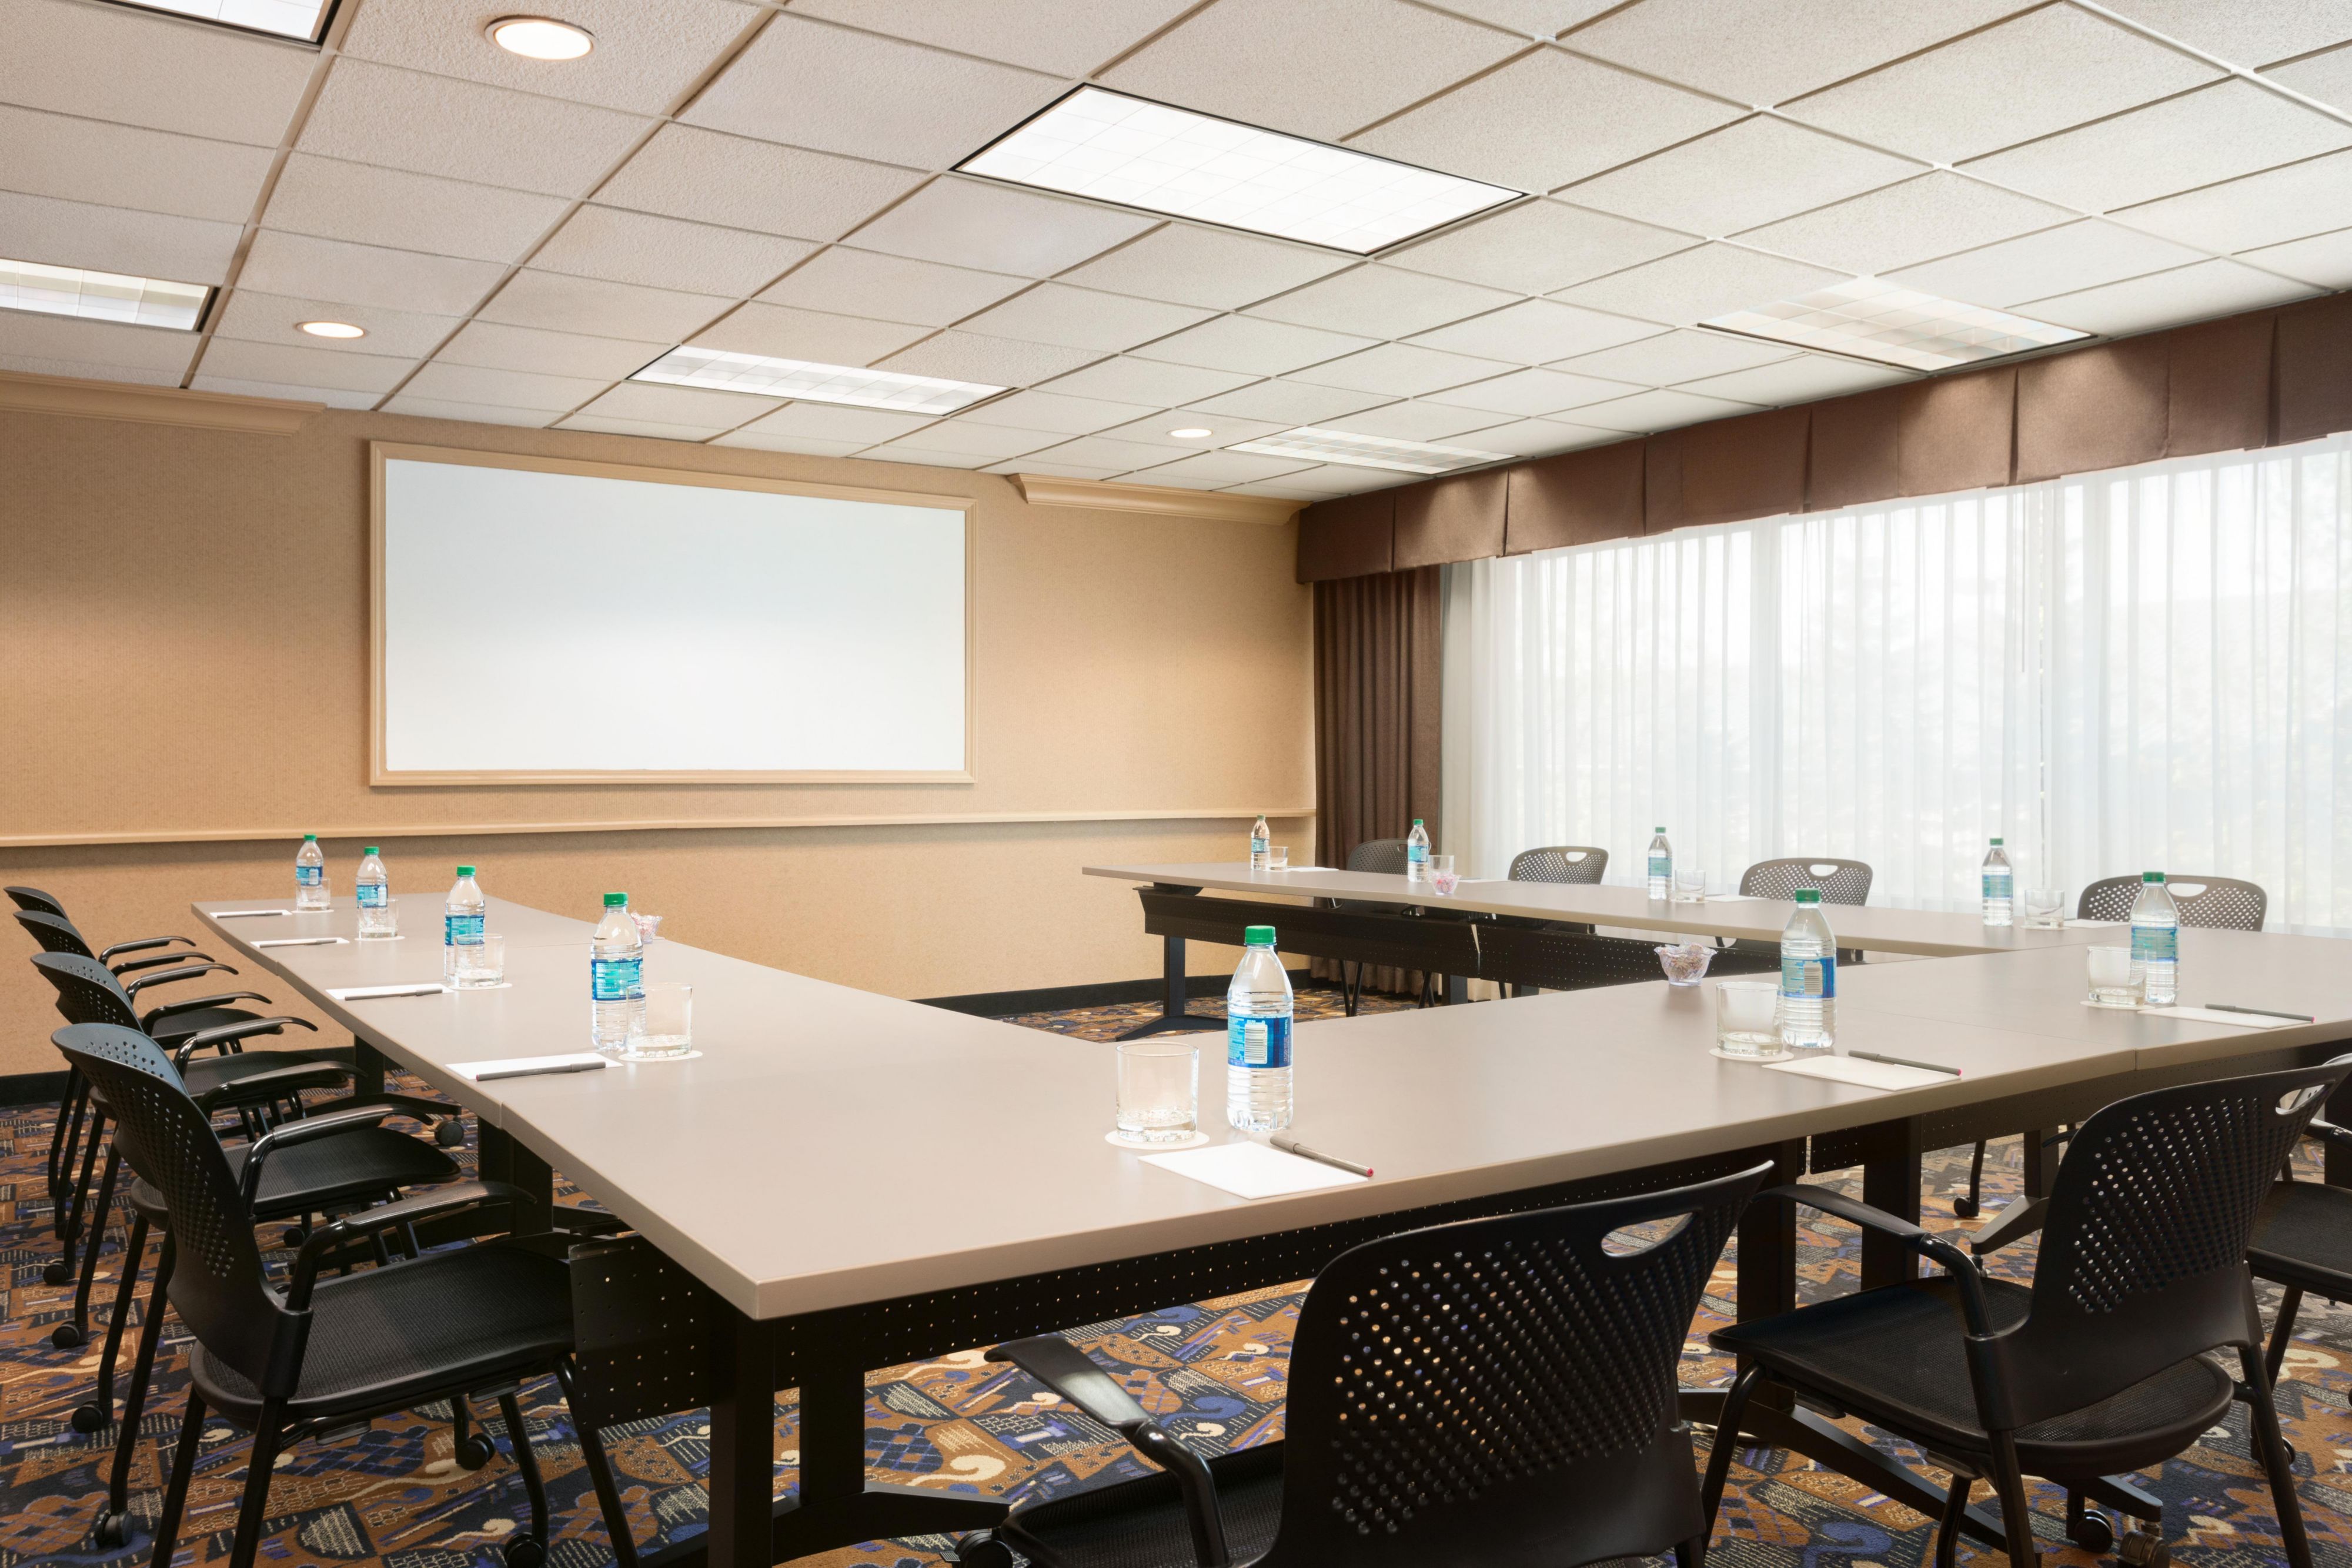 The Auburn E meeting room is flexible for all types of meetings.